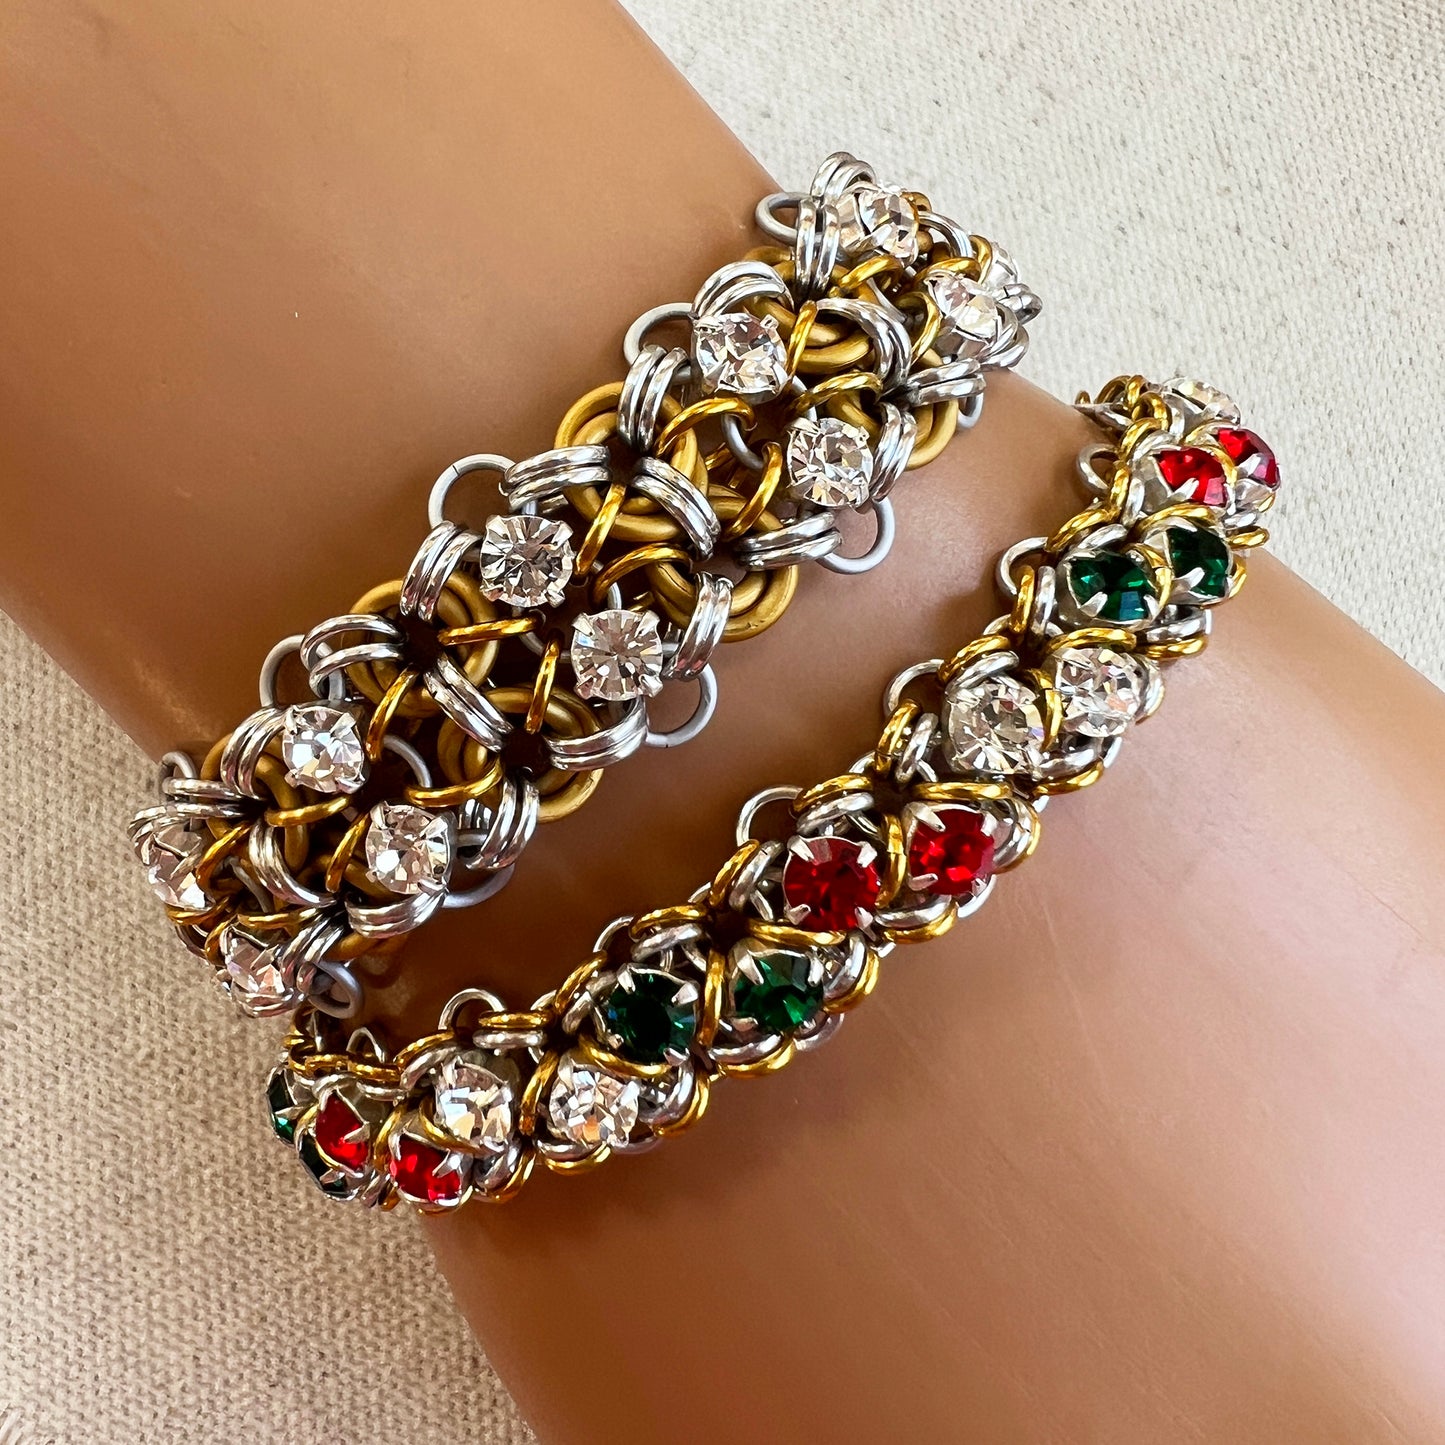 Rhinestones and Roses Bracelet kit with video class - Silver, Gold & Crystal